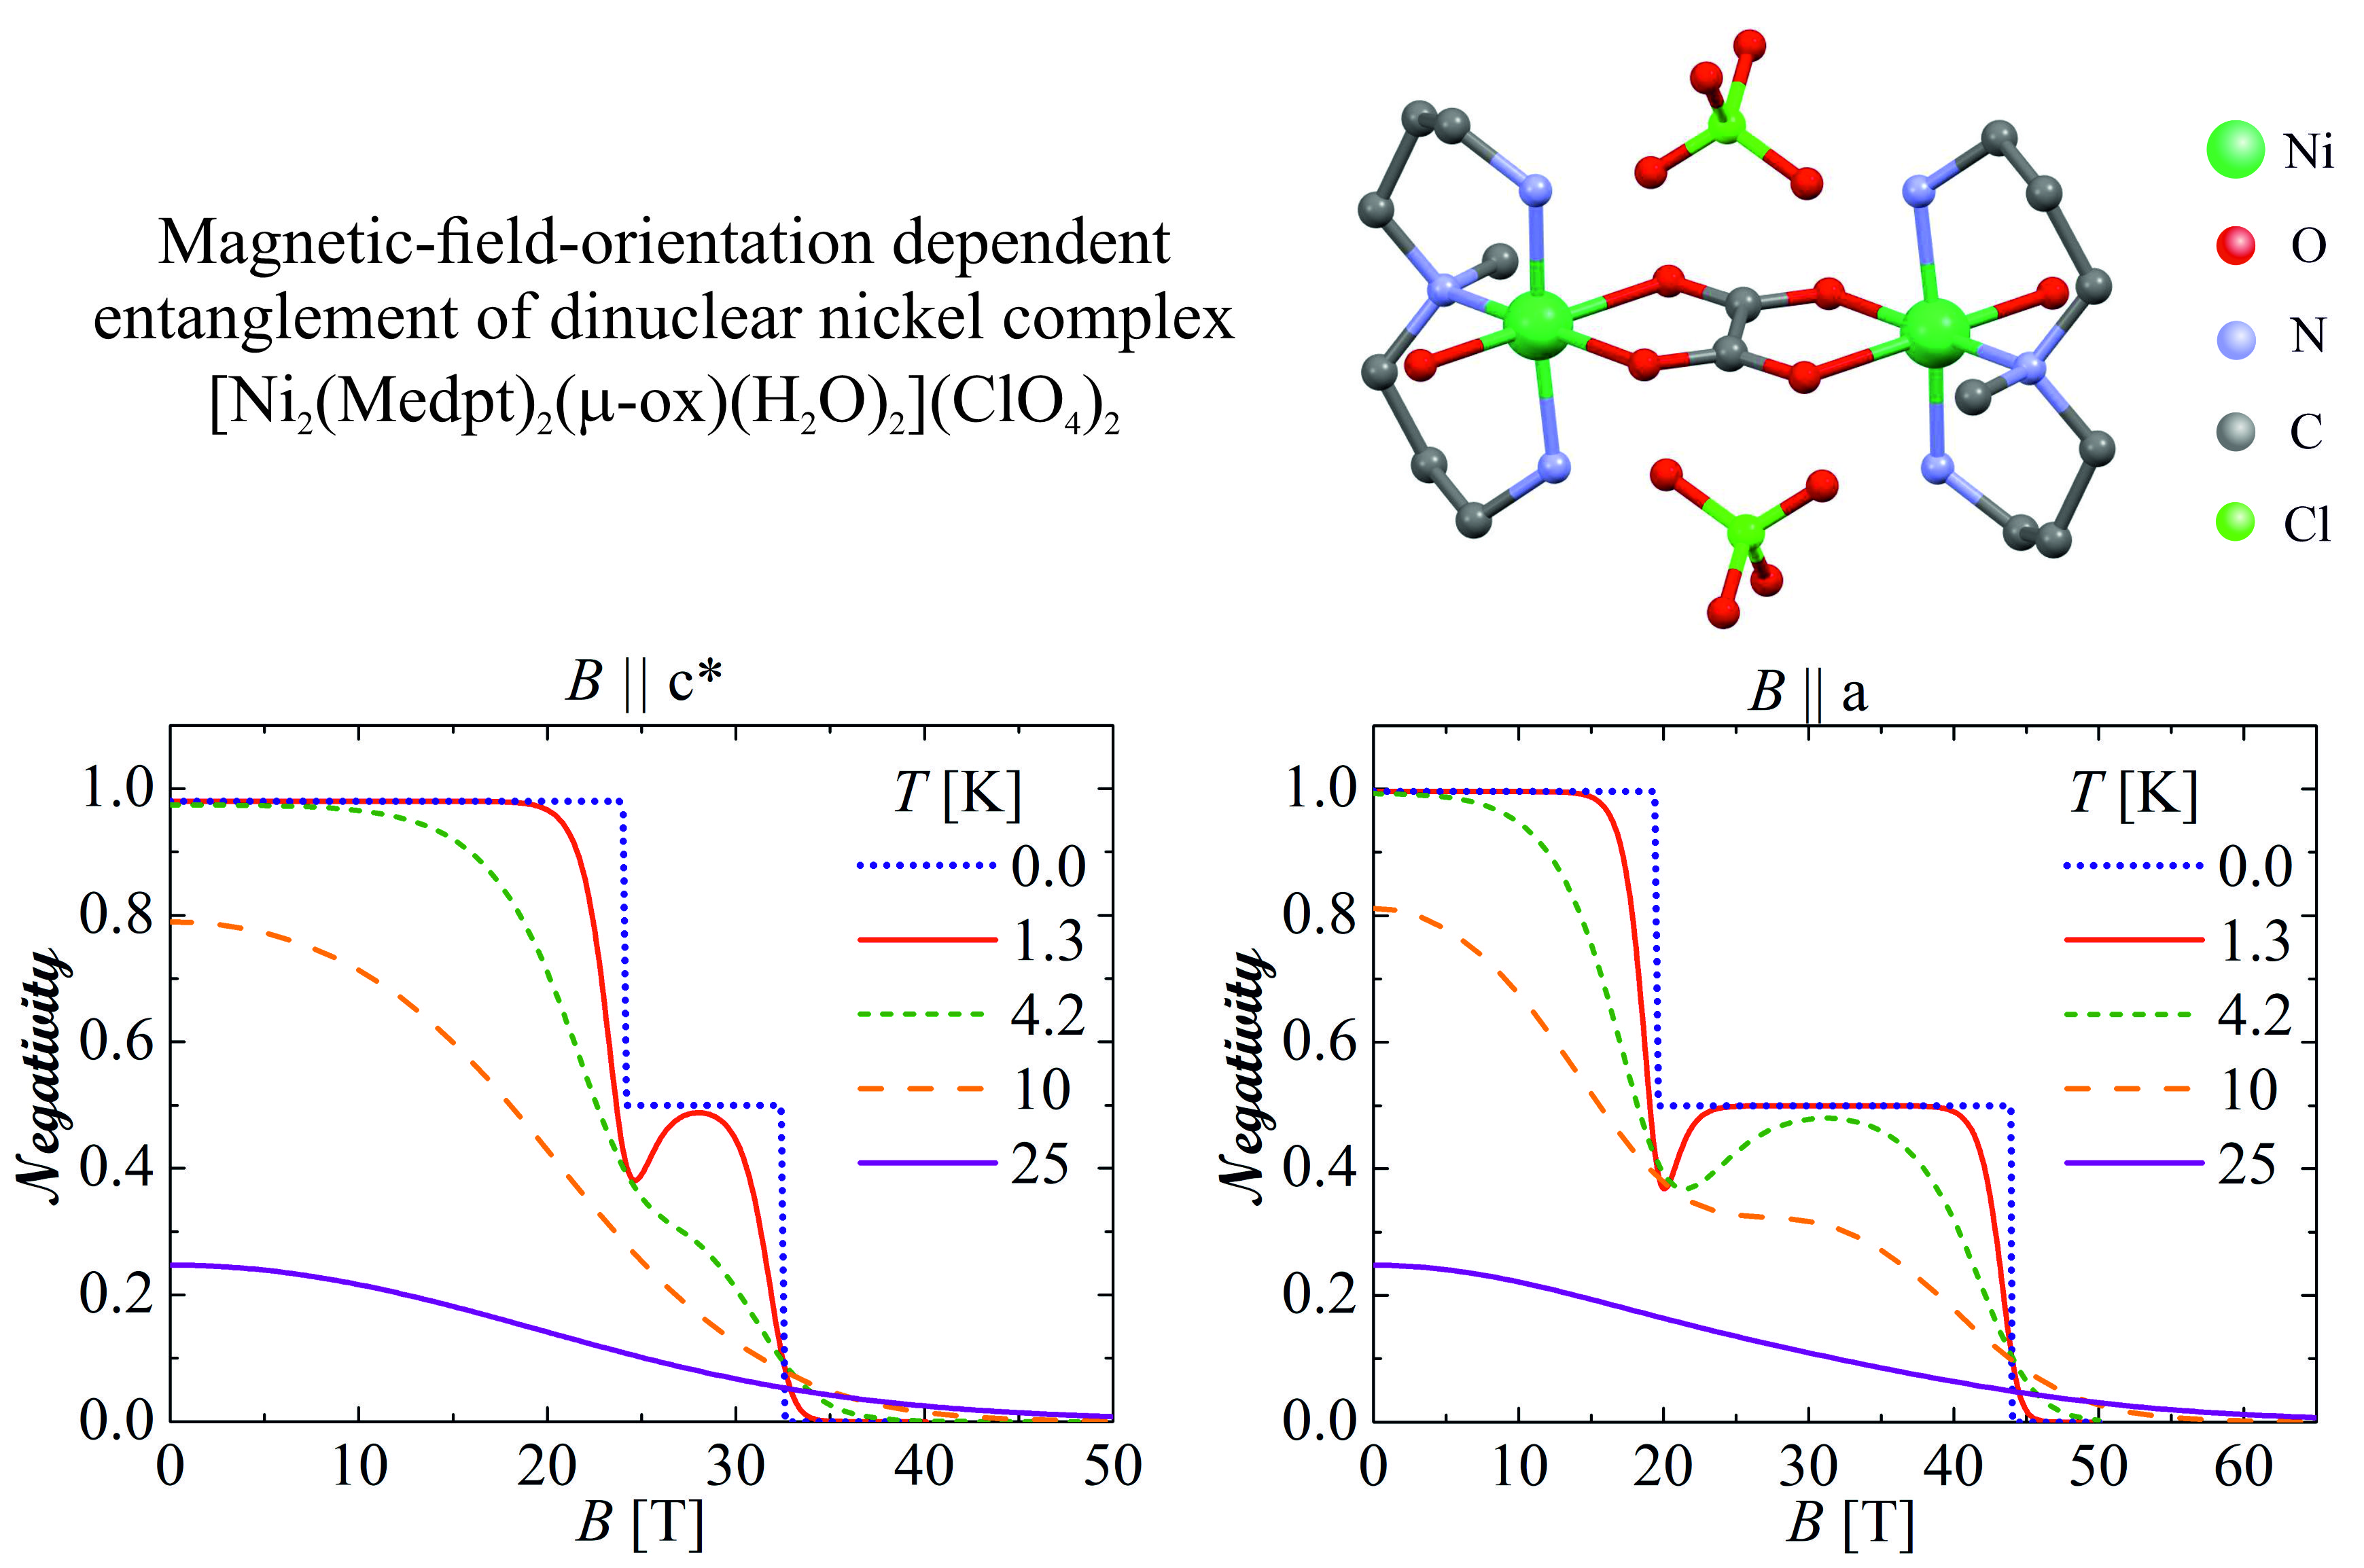 Molecules | Free Full-Text | Magnetic-Field-Orientation Dependent Thermal Entanglement of a Spin-1 Heisenberg Dimer: The Case Study of Dinuclear Nickel Complex with an Uniaxial Single-Ion Anisotropy